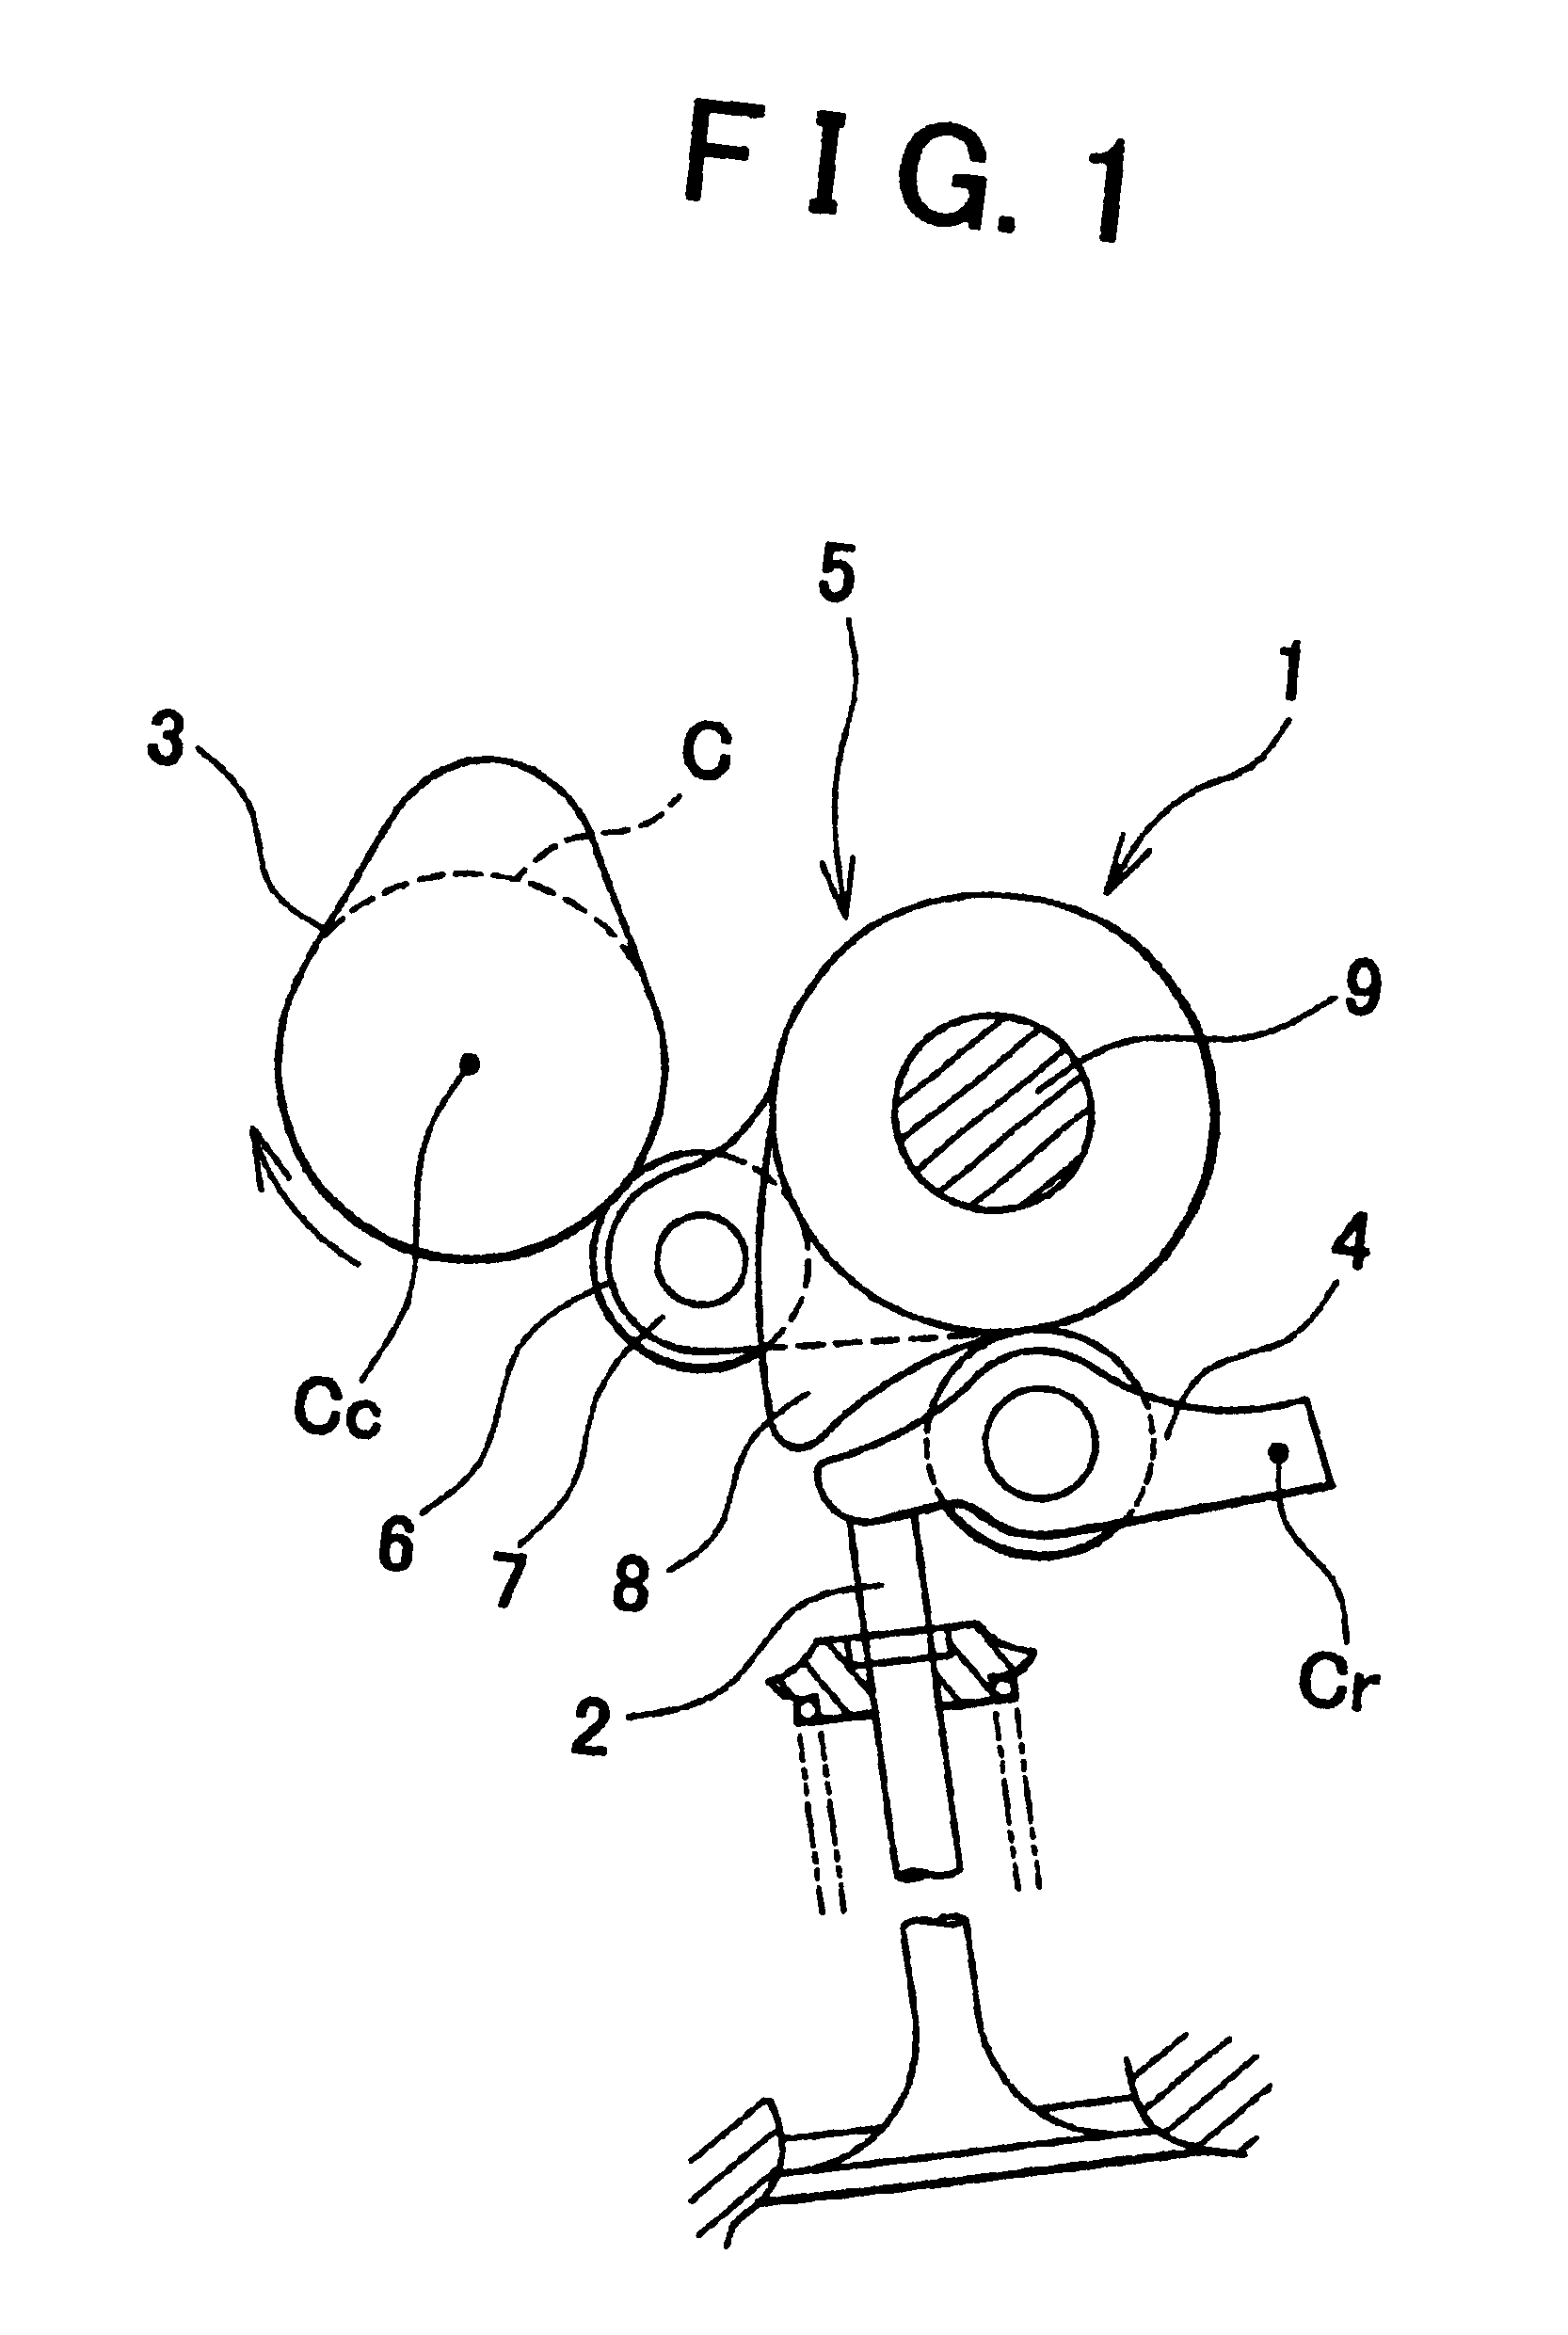 Control apparatus and method for valve actuating system of internal combustion engine